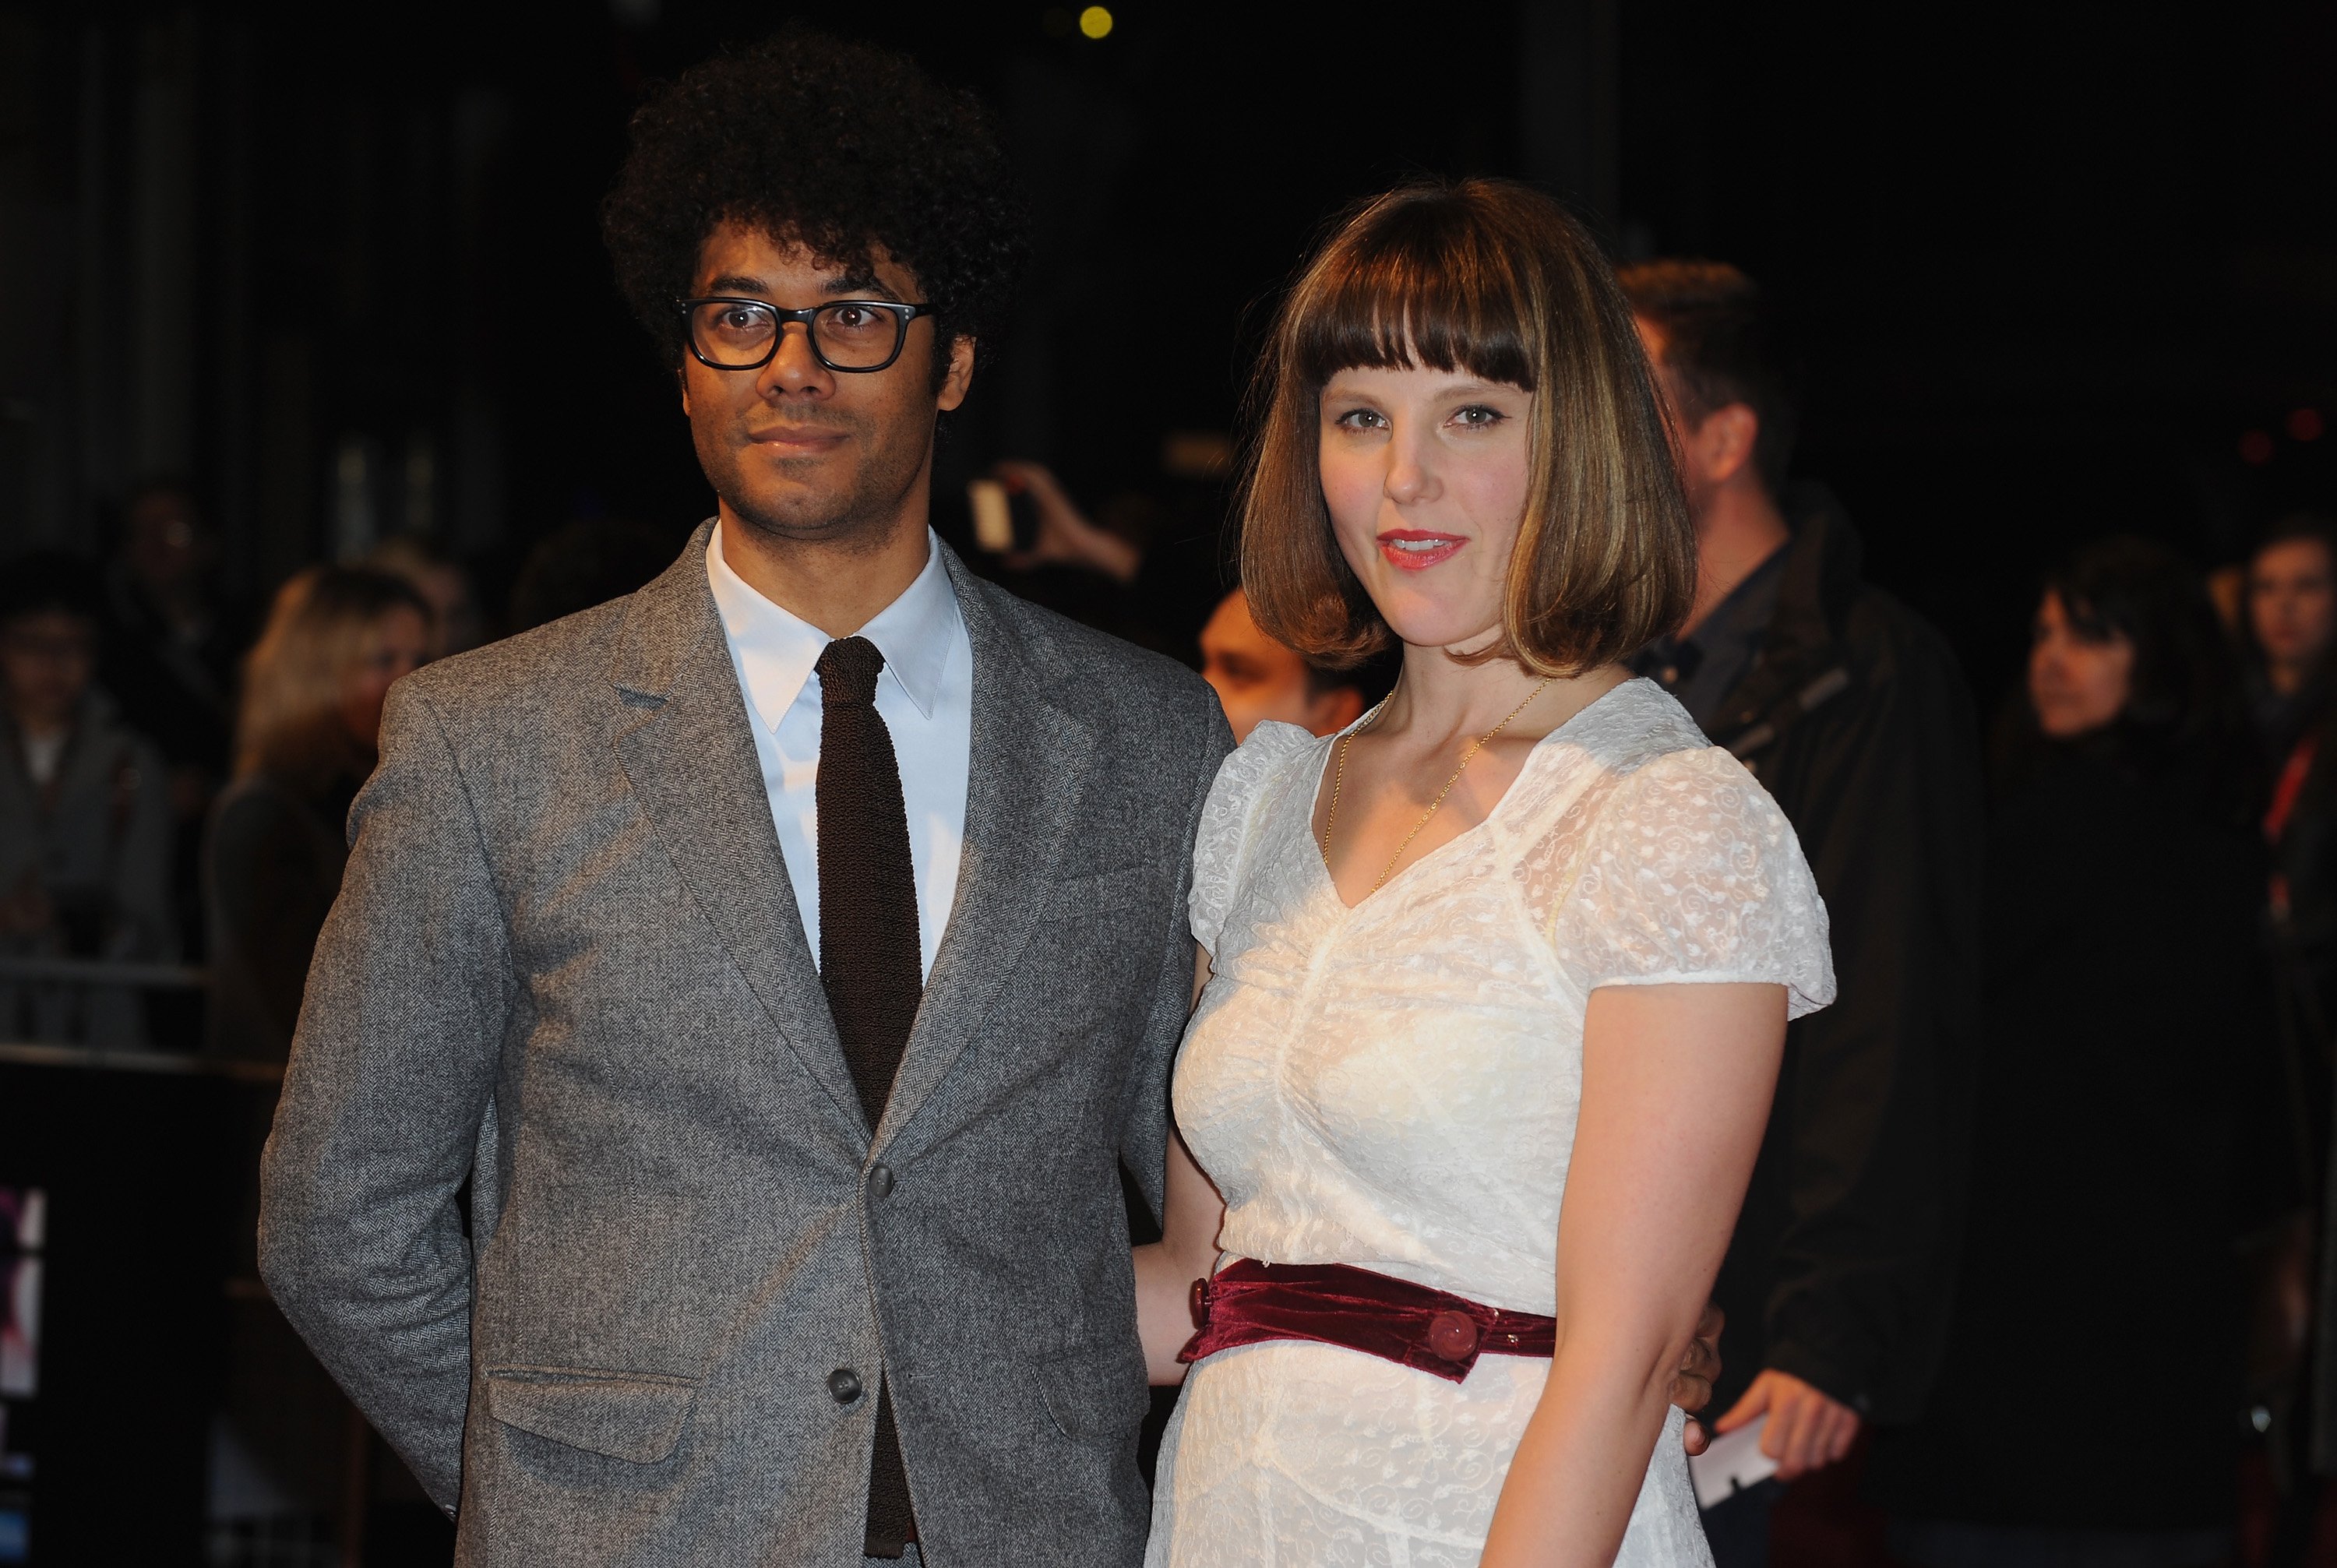 Lydia Fox and Richard Ayoade at the screening of "The Double" on October 12, 2013, in London | Source: Getty Images